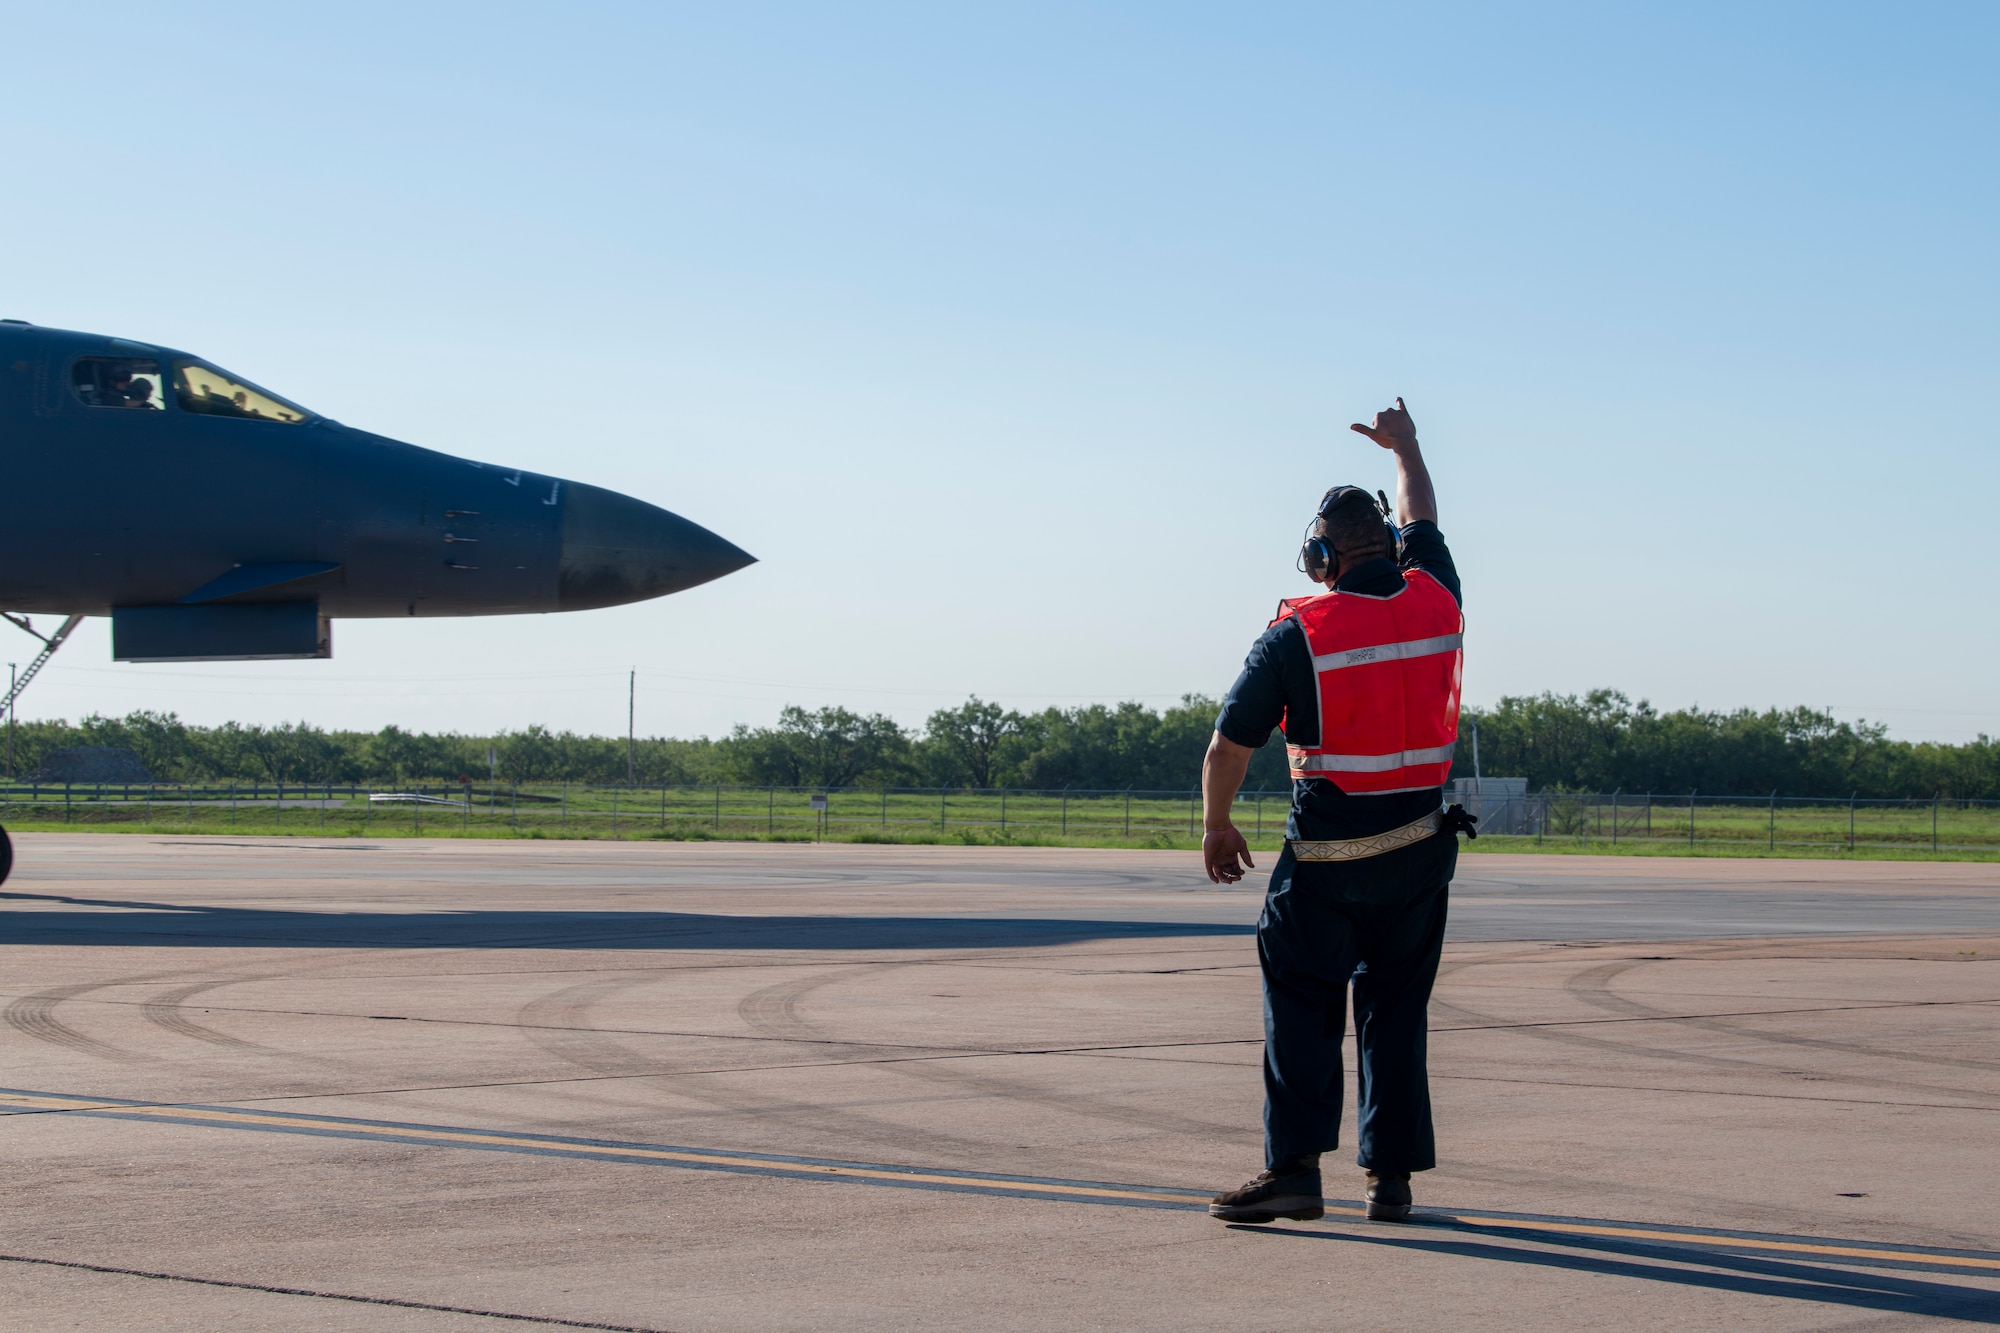 MSgt Kevin Minnick, from the 489th Maintenance Squadron, gives the B-1B Lancer aircrew a hand signal at Dyess Air Force Base, Texas Sept. 7th, 2022, before their take-off in support of a Bomber Task Force mission. Strategic comber missions, such as the BTFs, enhance the readiness and training necessary to respond to any potential crisis or challenges across the globe. (U.S. Air Force photo by Senior Airman Mercedes Porter)